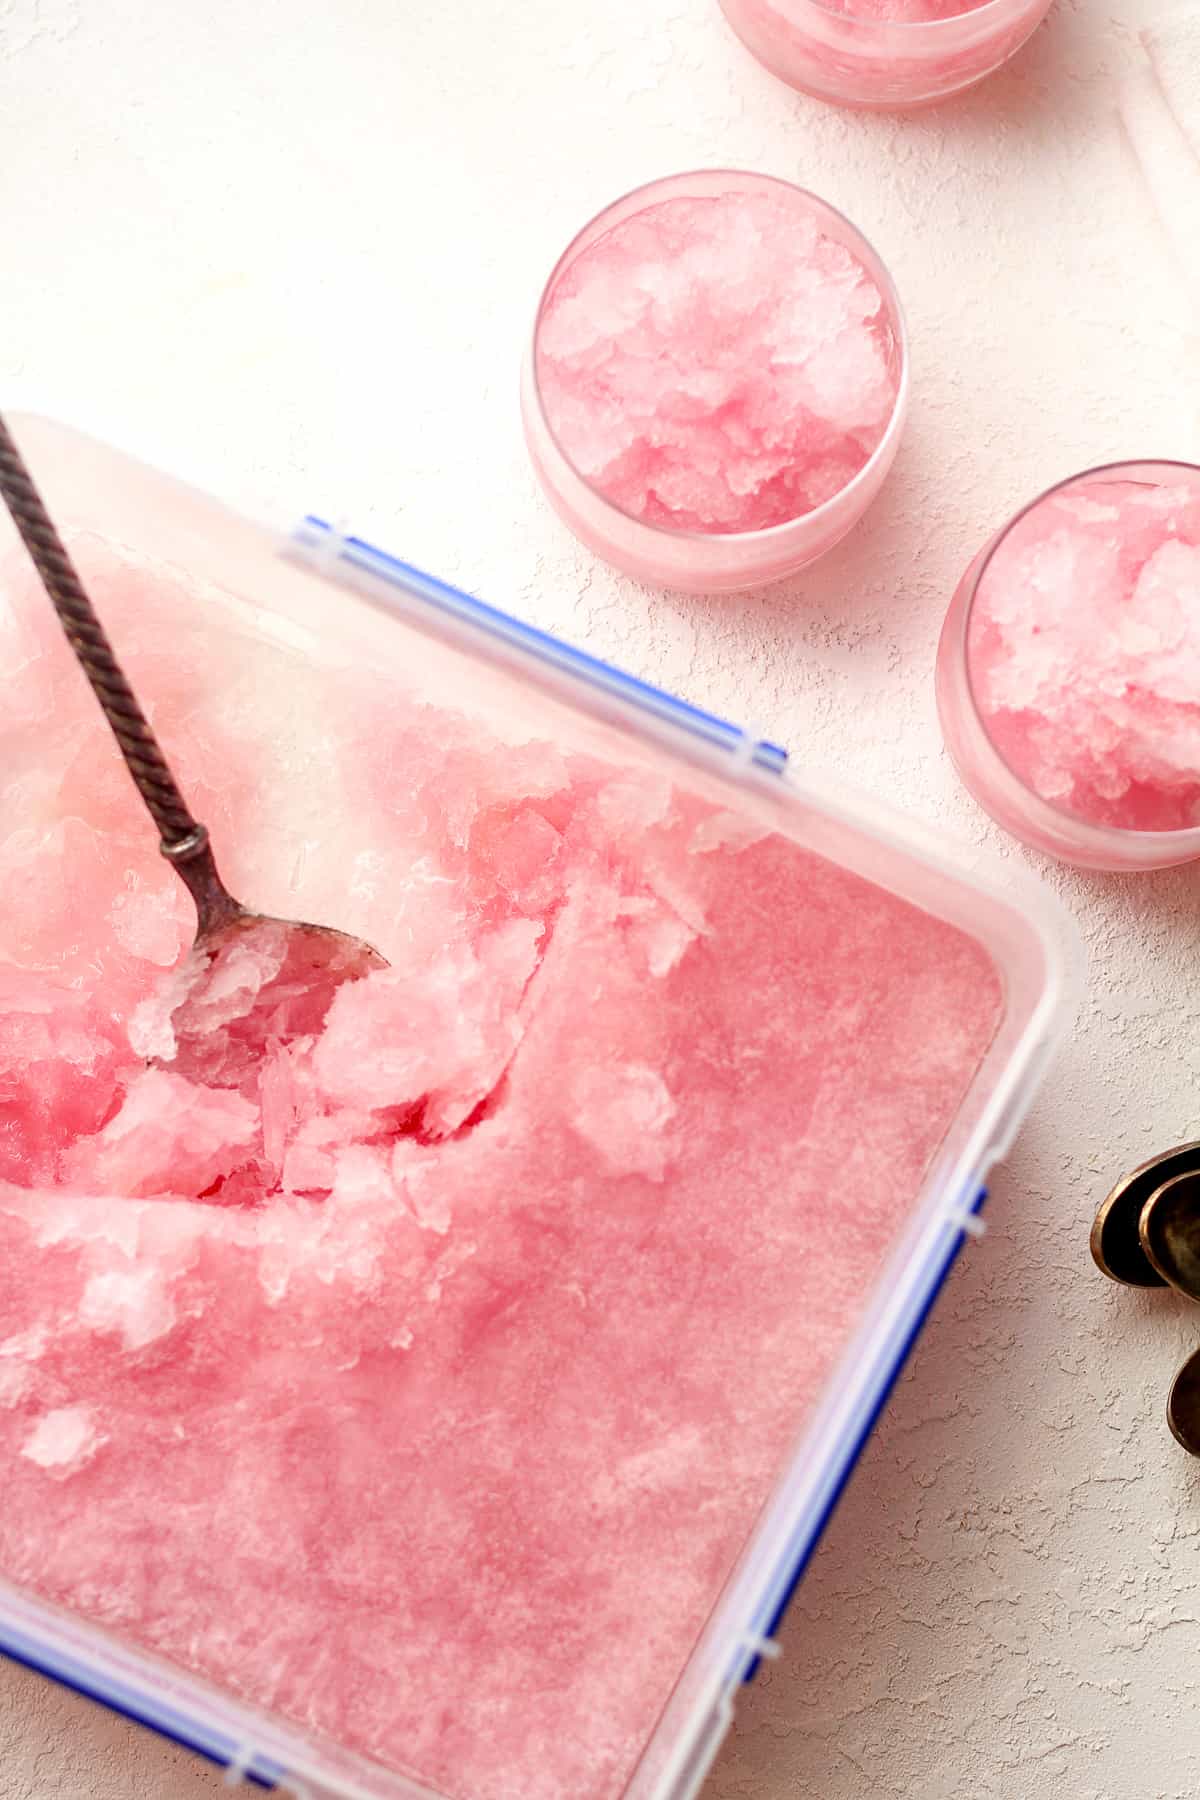 A container of pink slush with two glasses beside it.